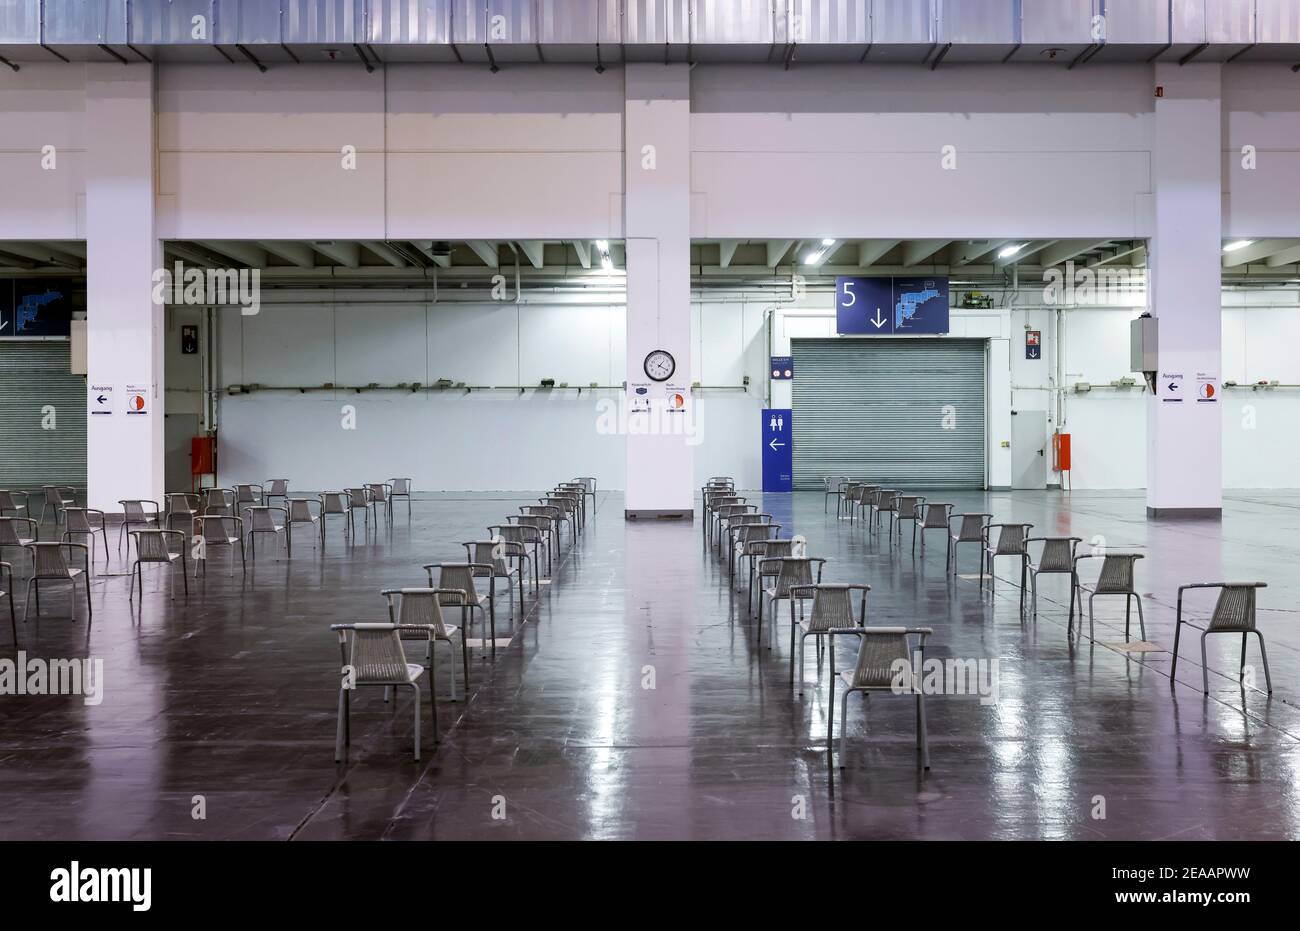 Essen, Ruhr area, North Rhine-Westphalia, Germany - Corona vaccination center Essen in the halls of Messe Essen, here more than 2, 000 people are to be vaccinated per day, chairs are by far available in the waiting area. Stock Photo